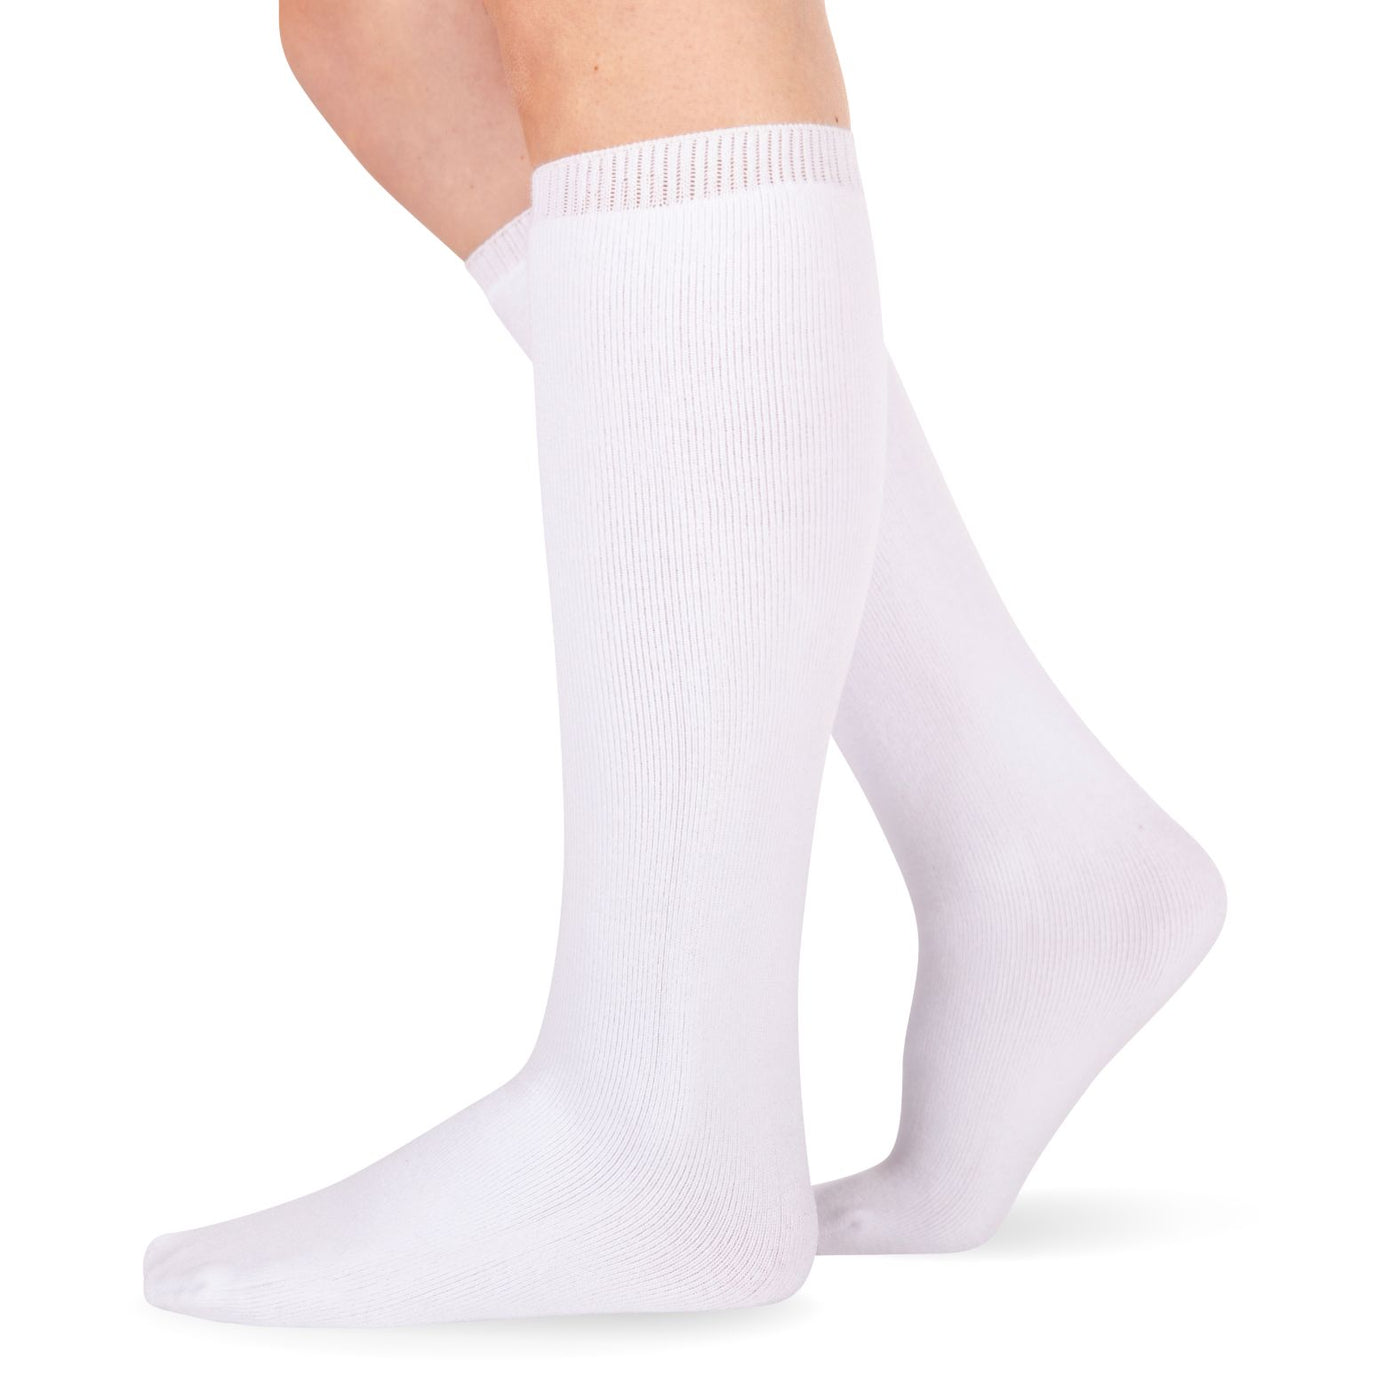 Cam walker socks help reduce friction between the brace and your shin